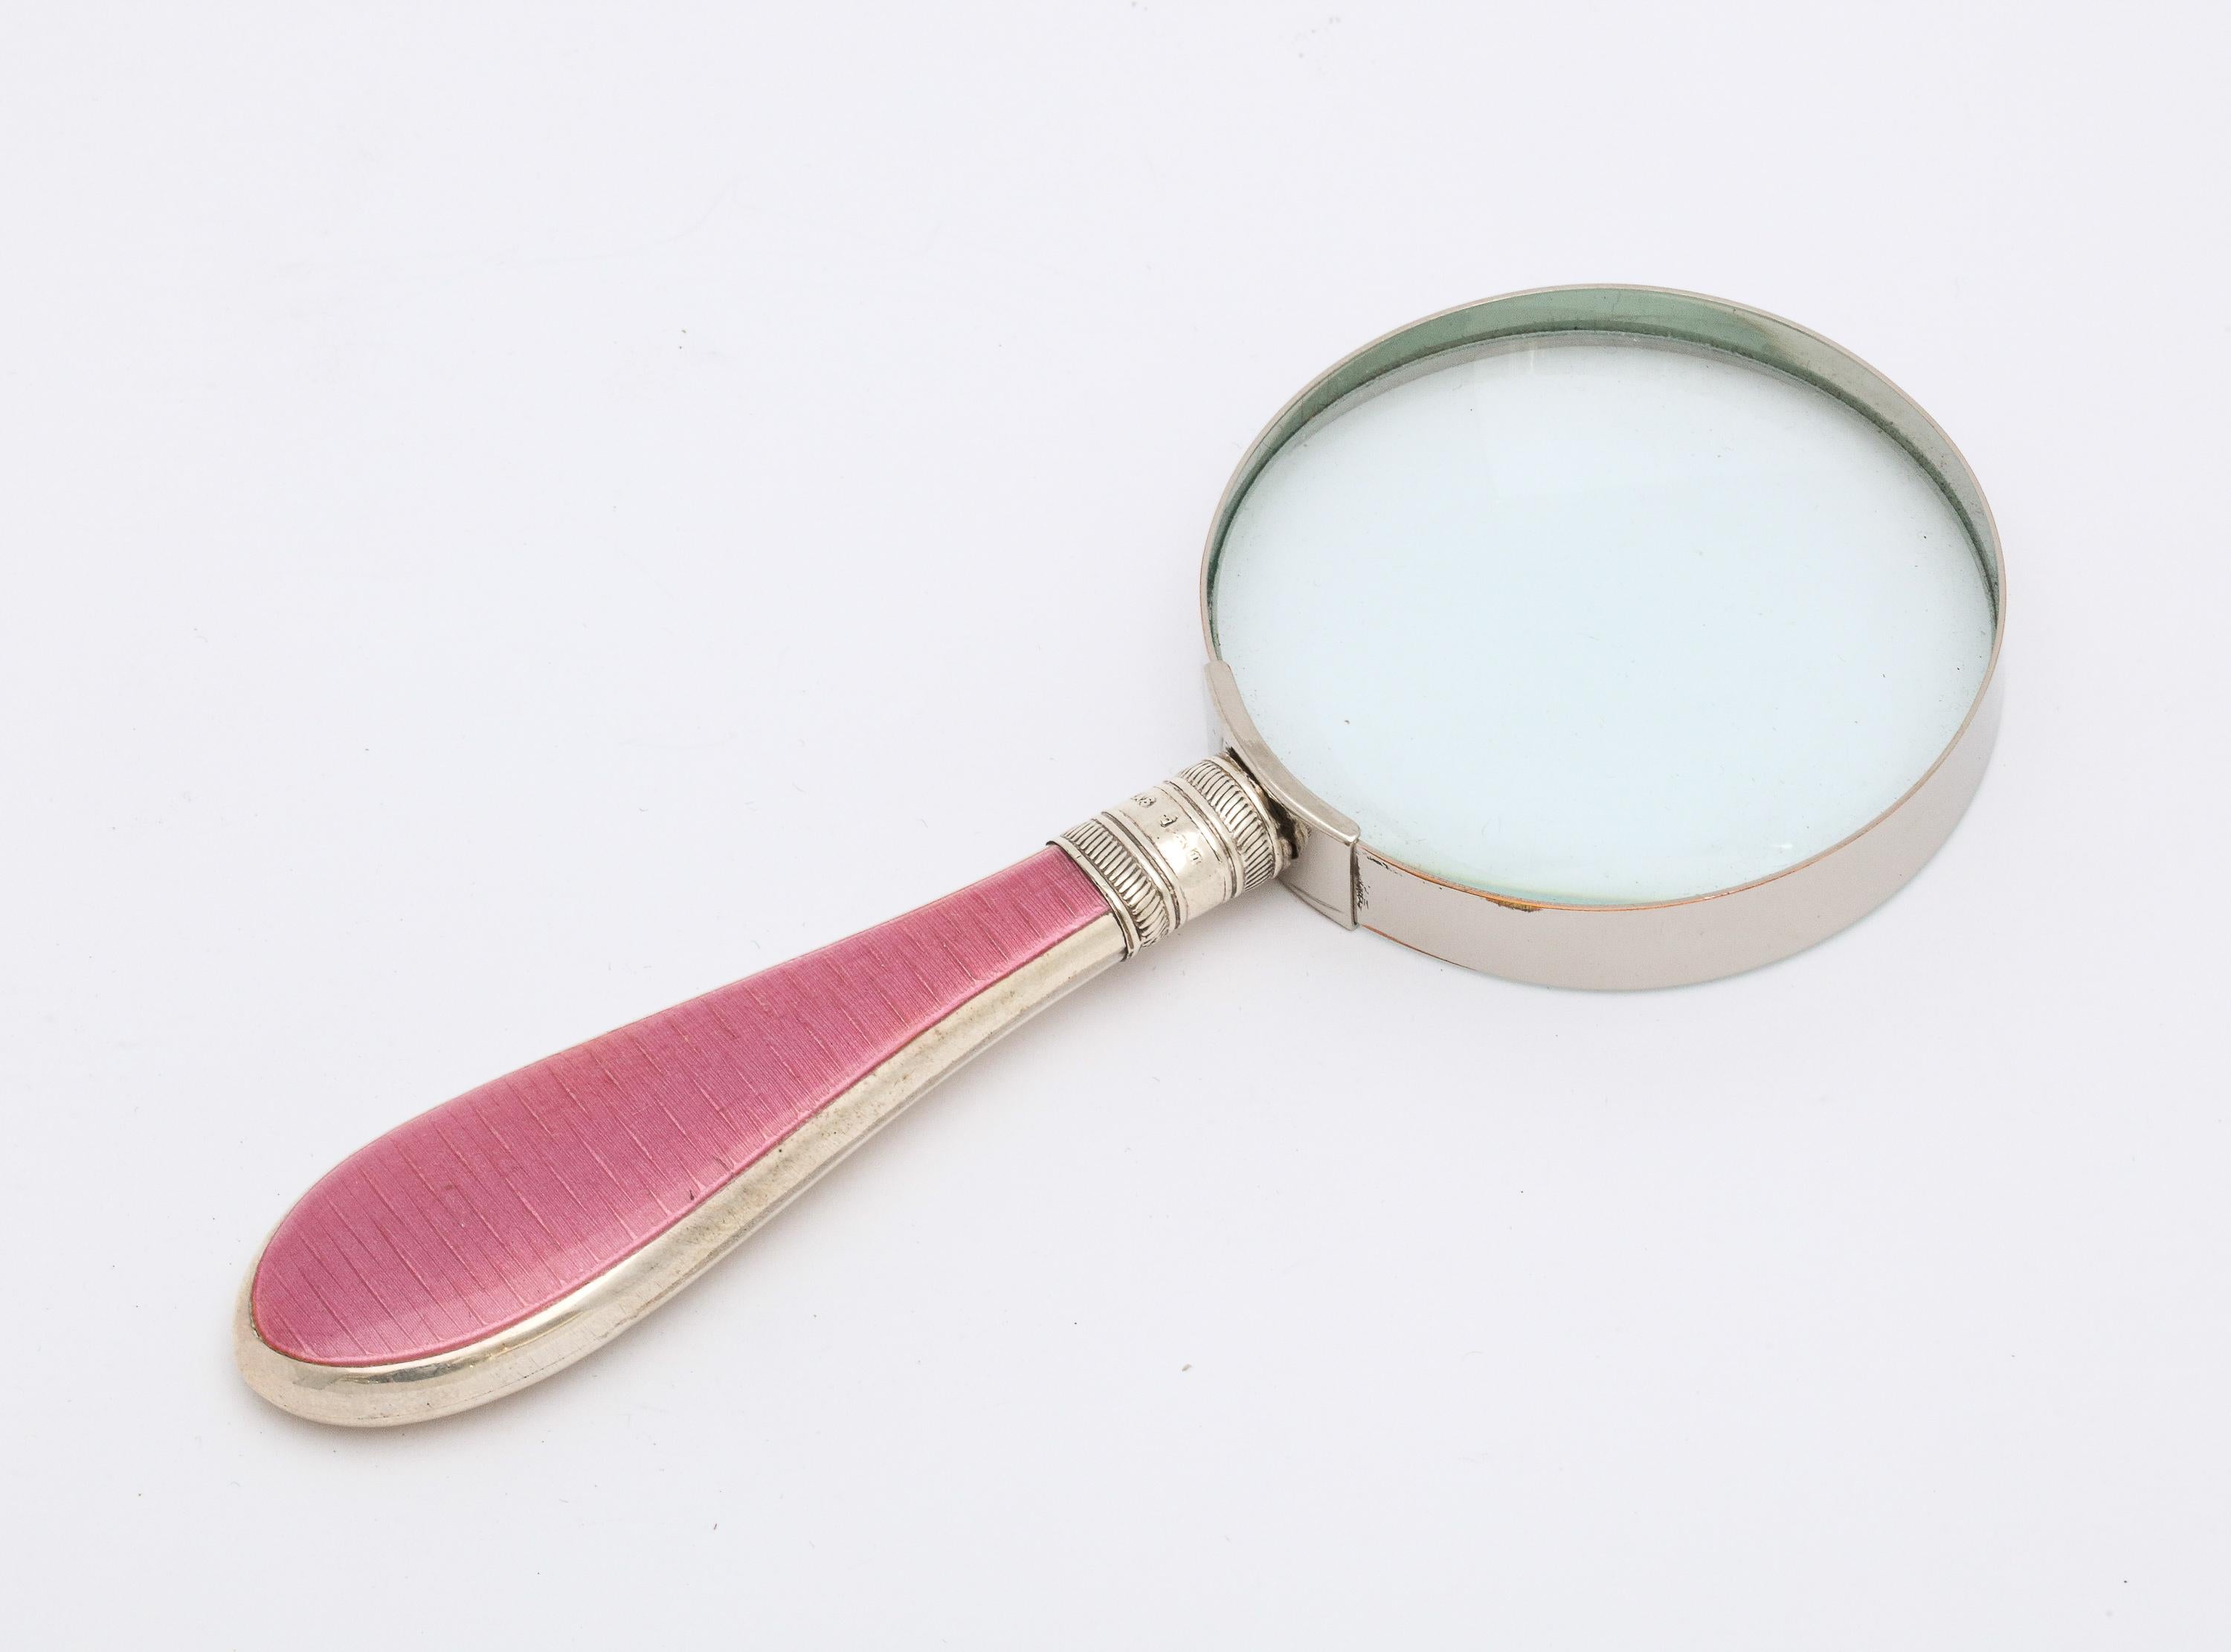 Edwardian, sterling silver and deep pink guilloche enamel-mounted magnifying glass, Sheffield, England, year-hallmarked for 1905, James Scholes -maker. Glass surround is metal. Enamel is on one side of the handle. Measures 6 1/2 inches long x 2 1/8